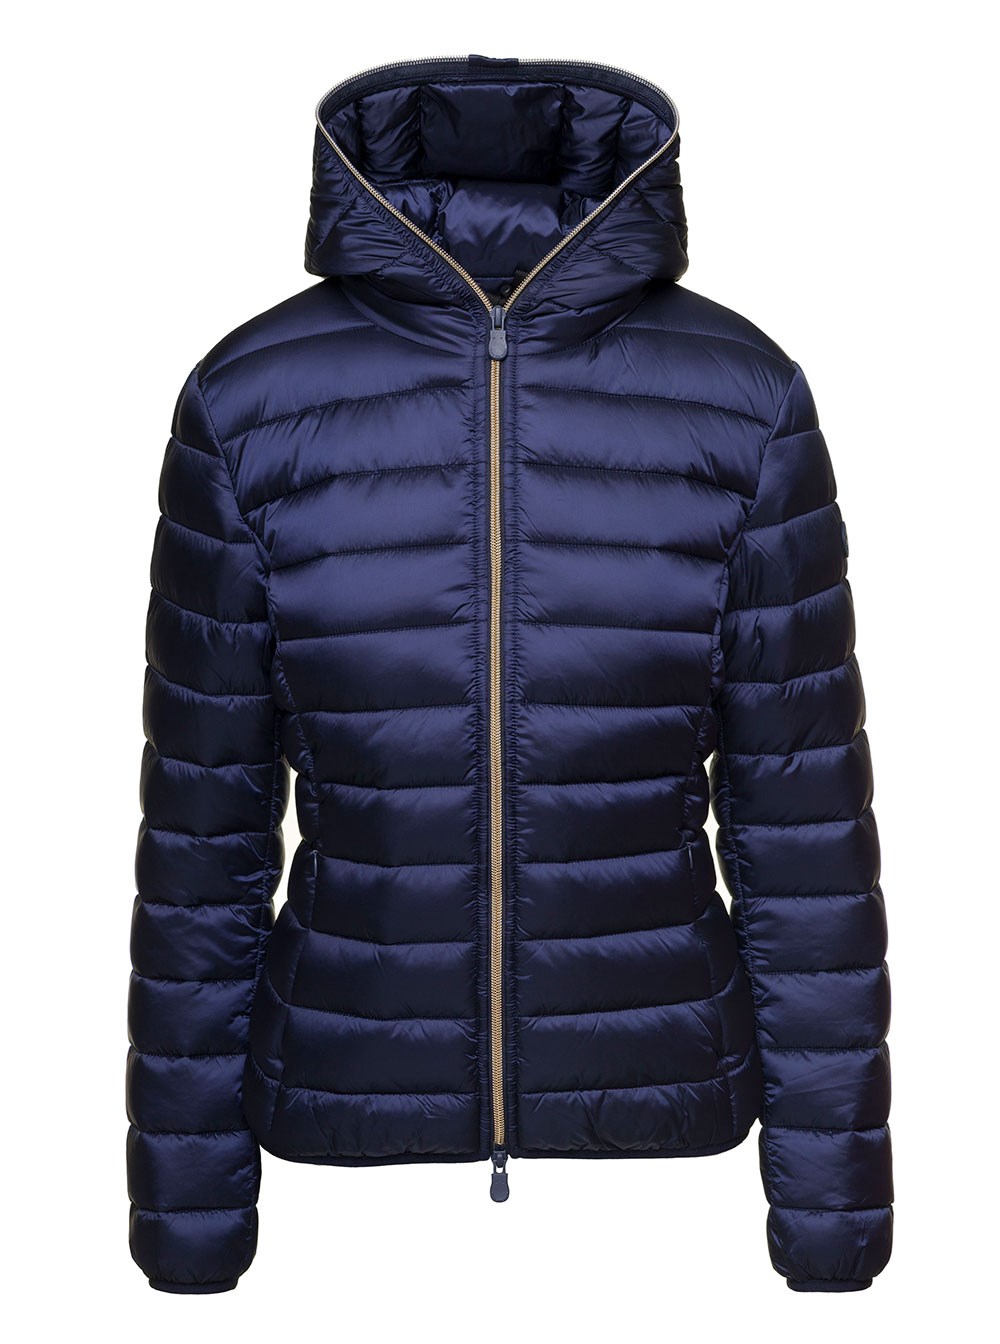 'Alexis' Shiny Blue Hooded Zip-Up Down Jacket in Nylon Woman Save The ...